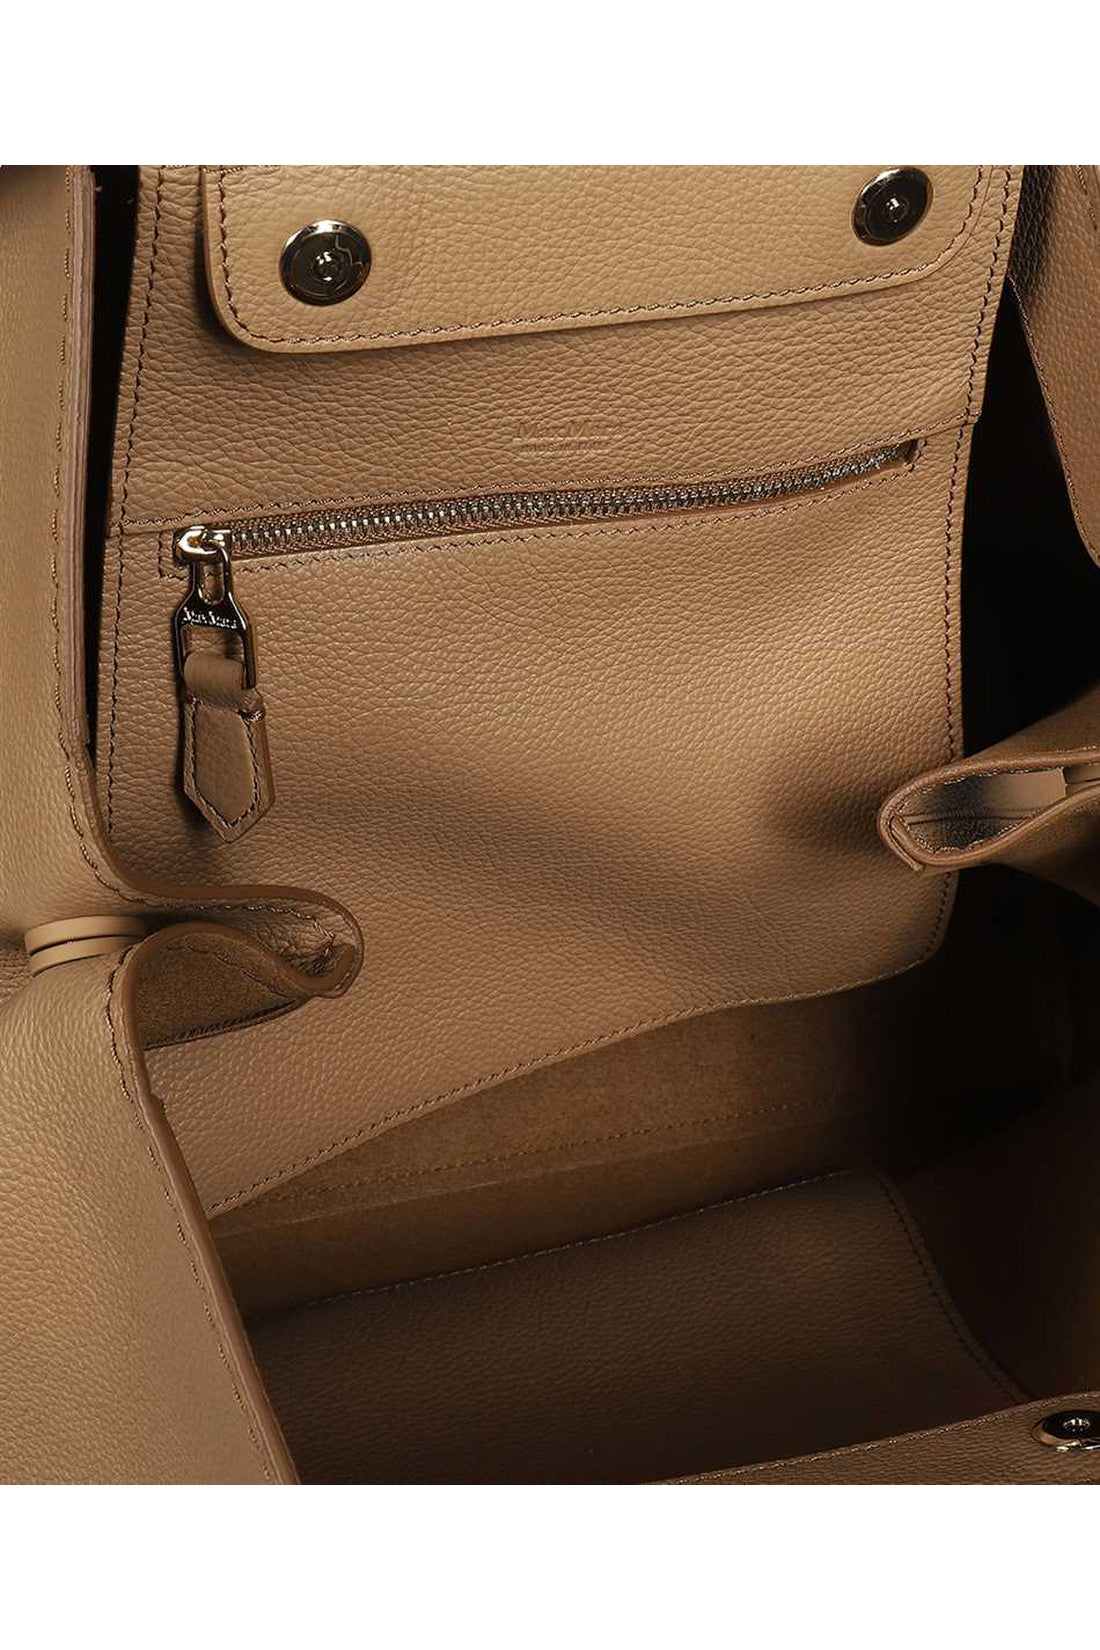 Max Mara-OUTLET-SALE-Leather tote-ARCHIVIST